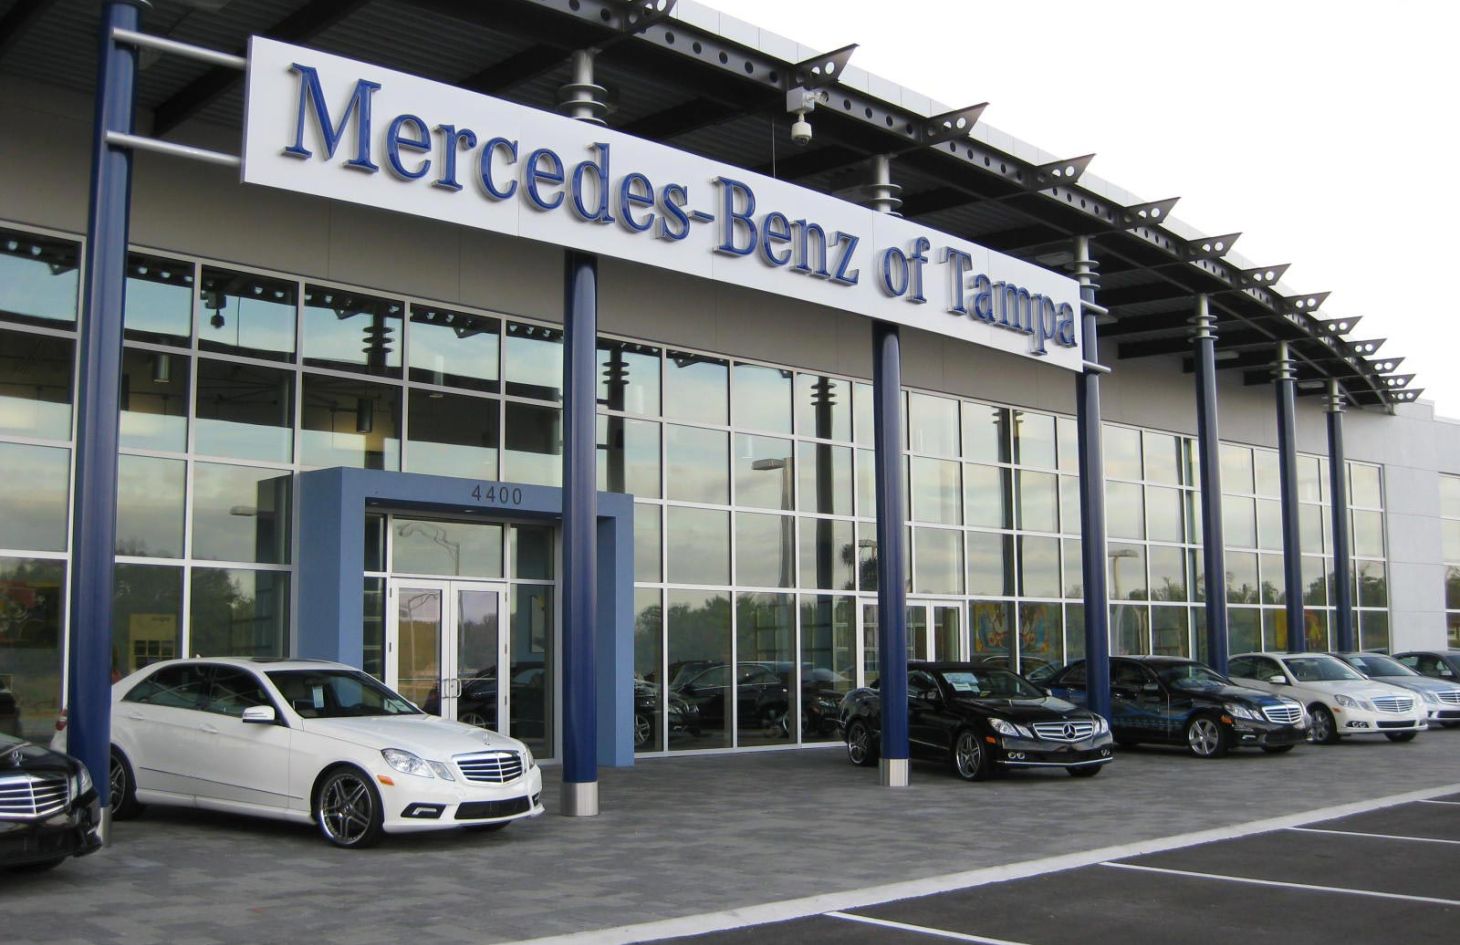 Mercedes Benz Of Tampa front view